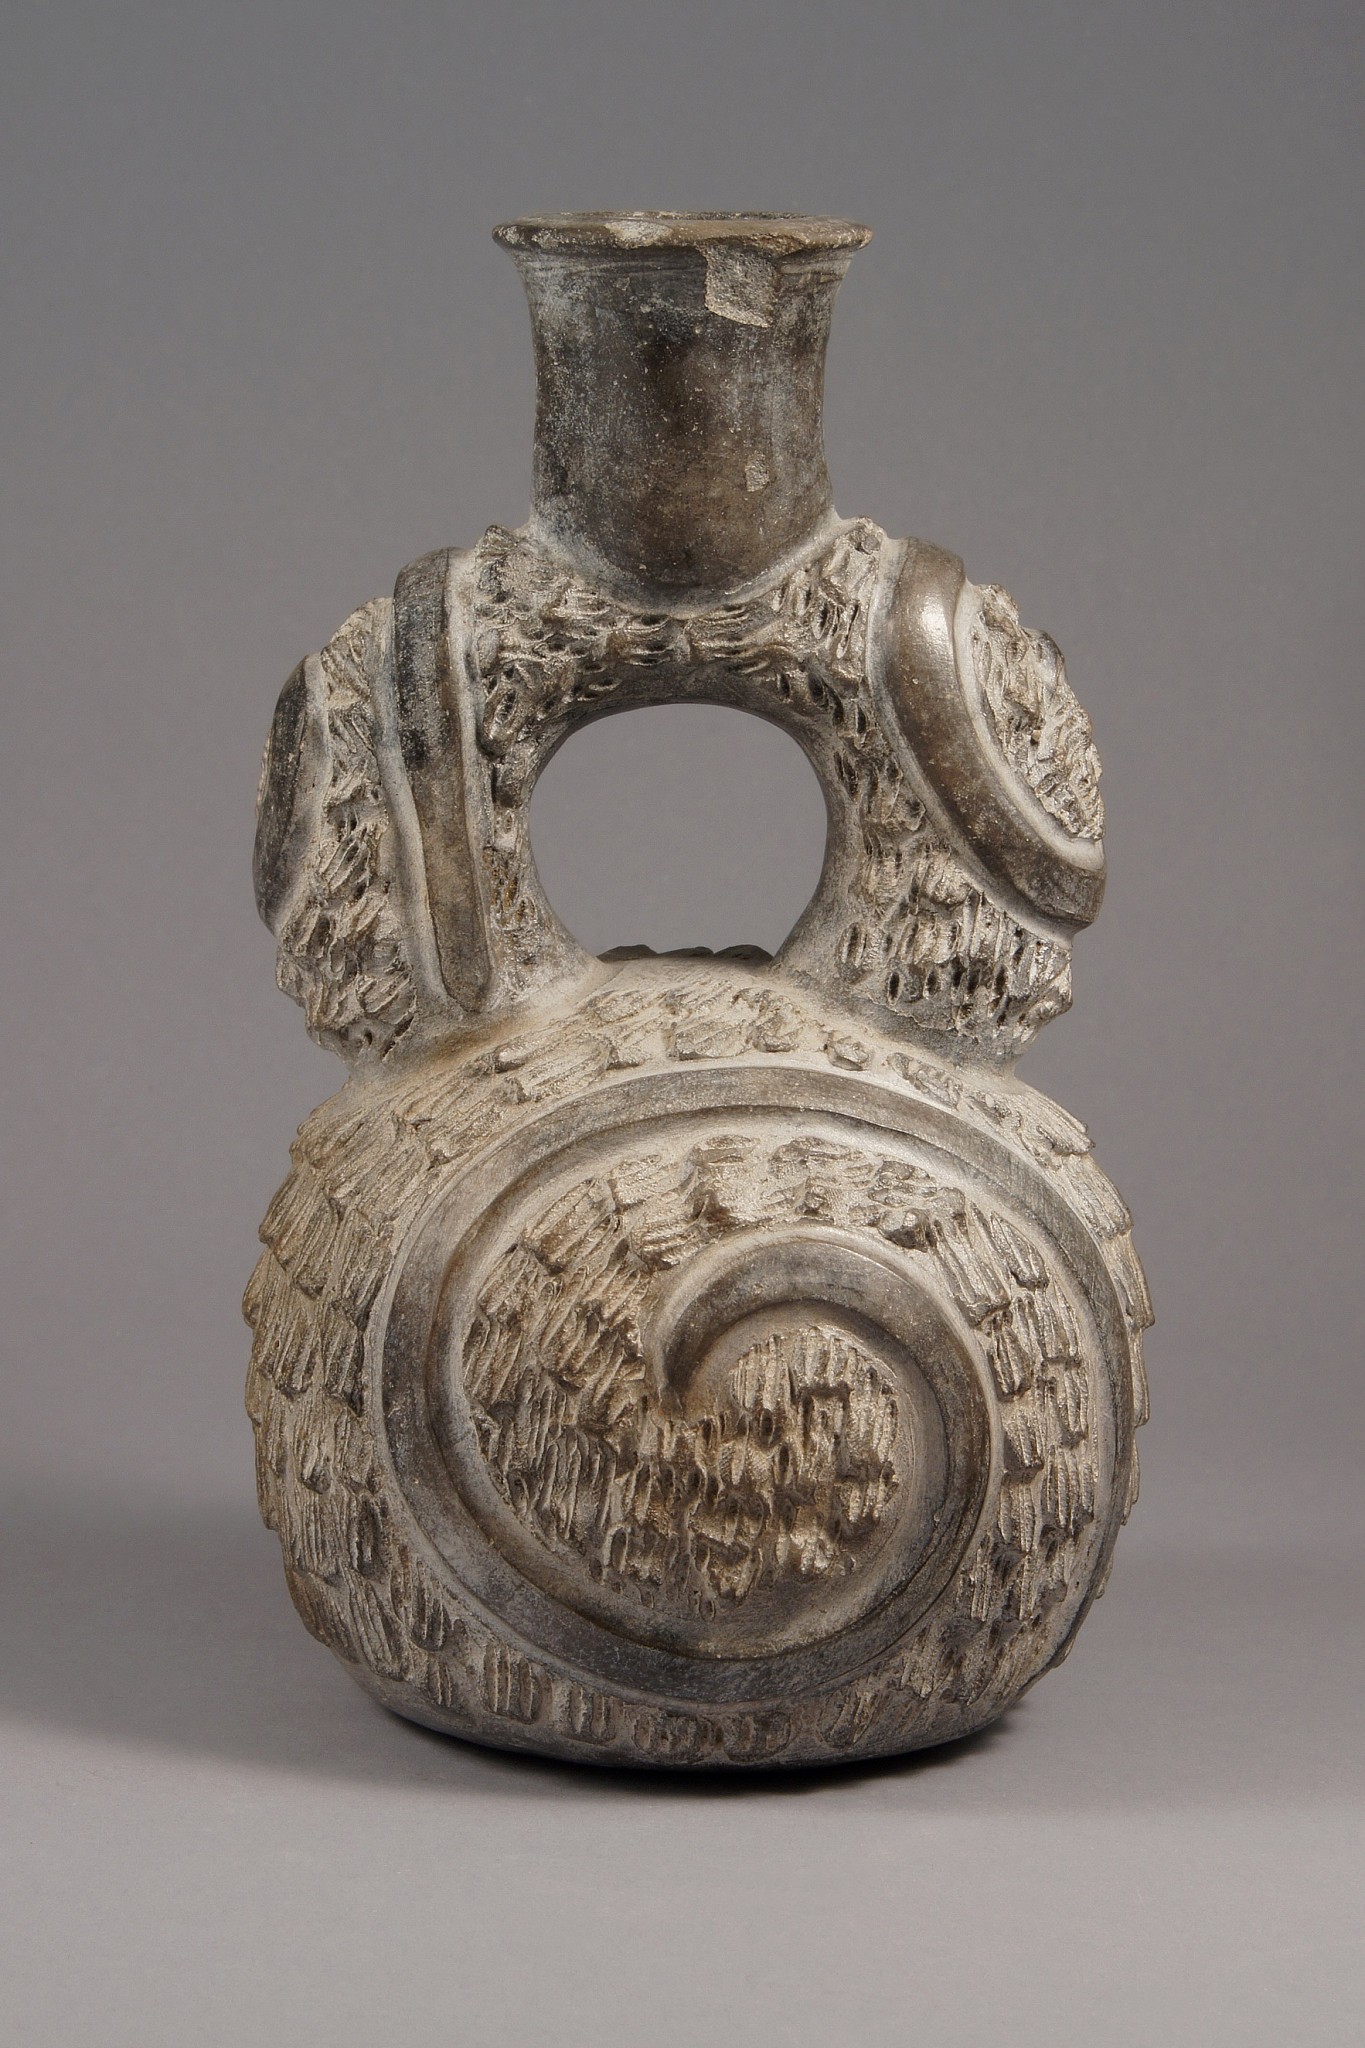 Peru, Chavin Stirrup Spout Vessel
This is an early and characteristic vessel from Cupisnique in the north coast of Peru, including the spiral design and comb texturing.  A similar one is illustated in Donnan, "Ceramics of Ancient Peru" (1992: 29).
Media: Ceramic
Dimensions: Height 9"
Price Upon Request
M5044